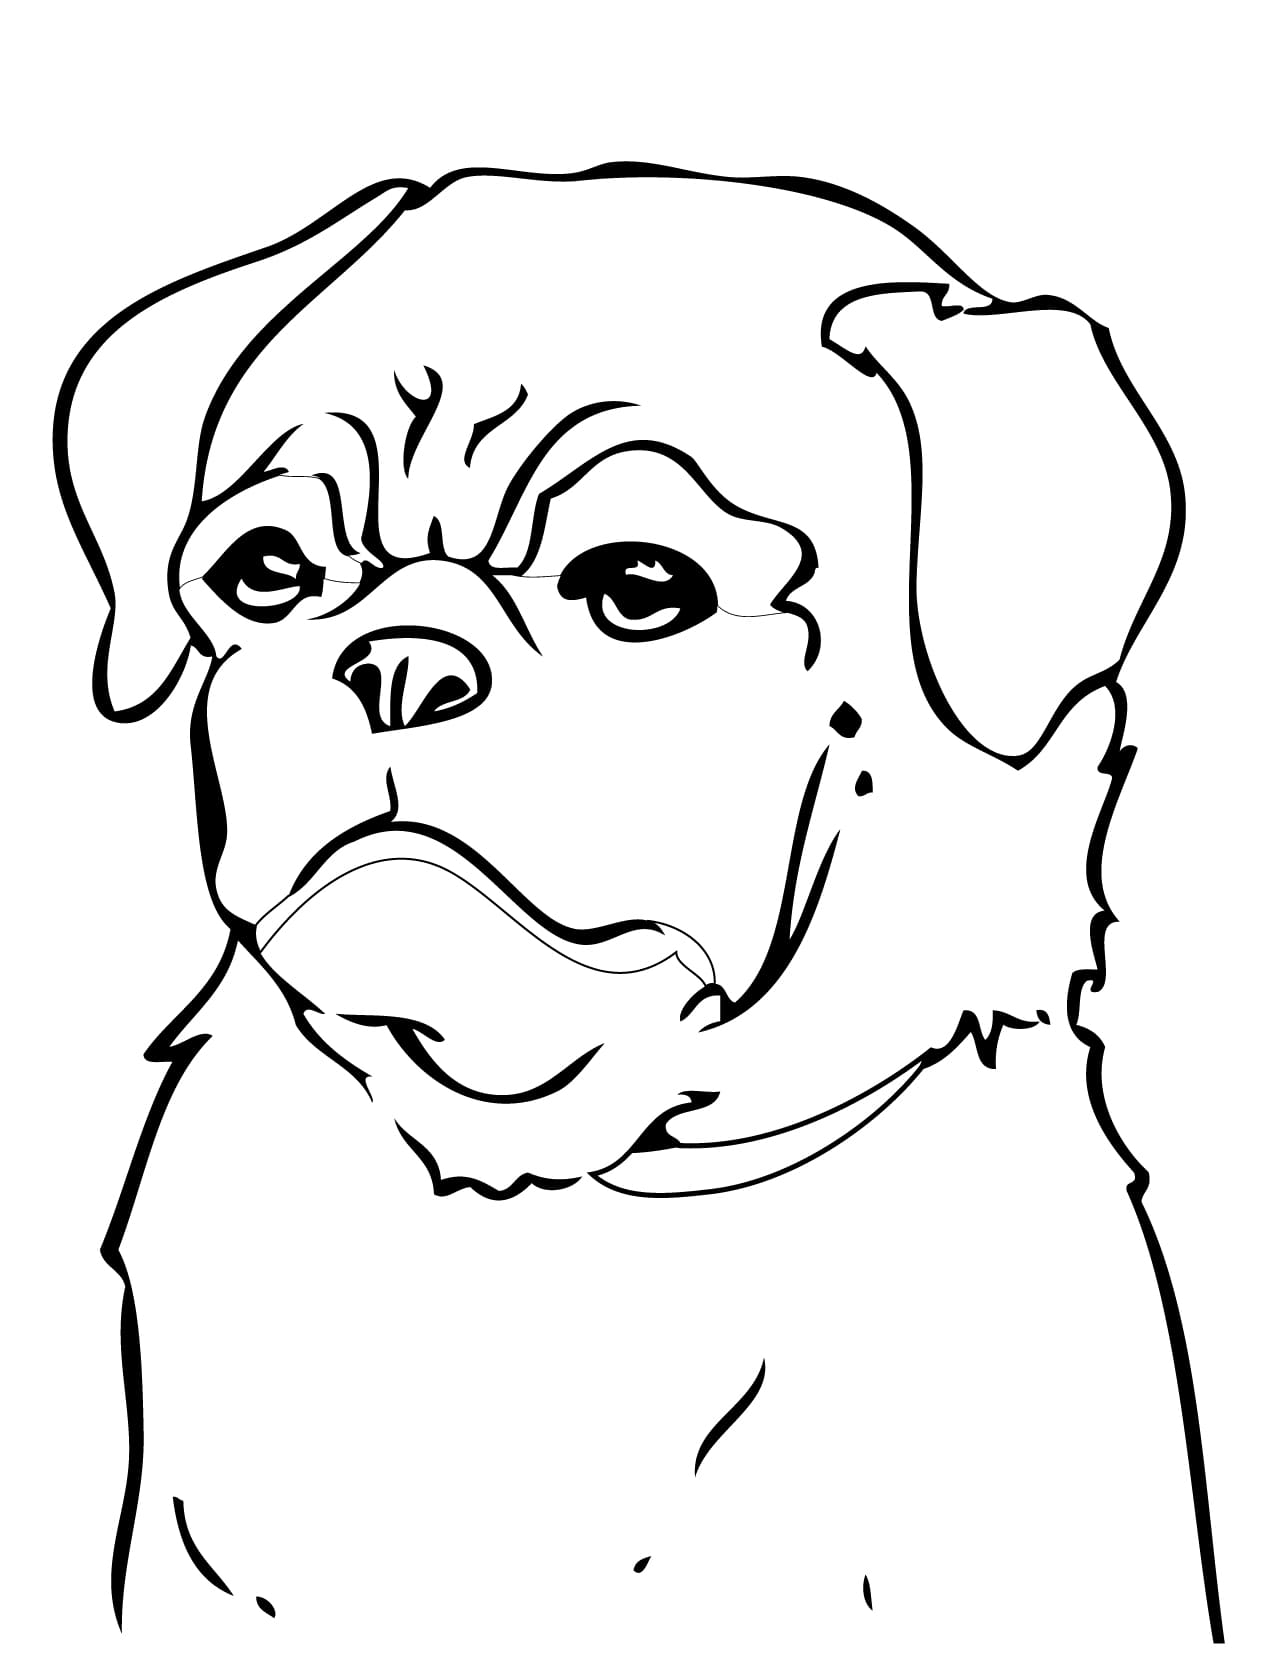 Pug Dog Coloring Pages to Print